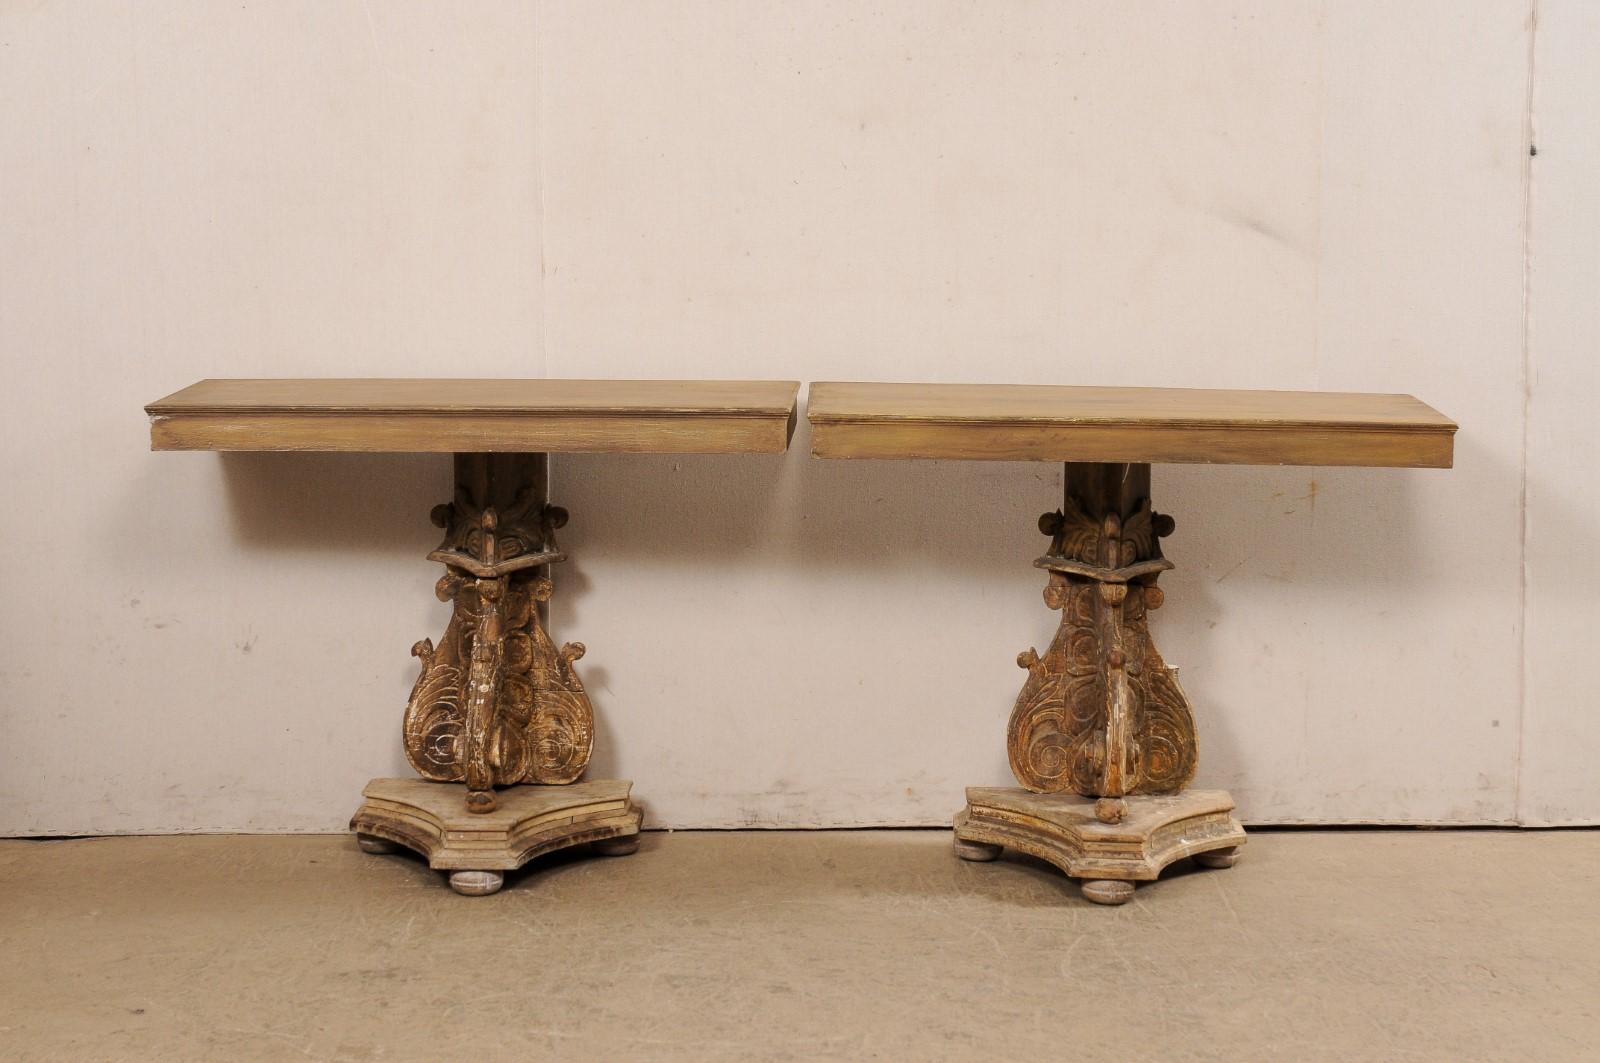 Italian Pair of Wall Consoles Raised on Carved-Wood Late 18th C. Pedestal Bases For Sale 8